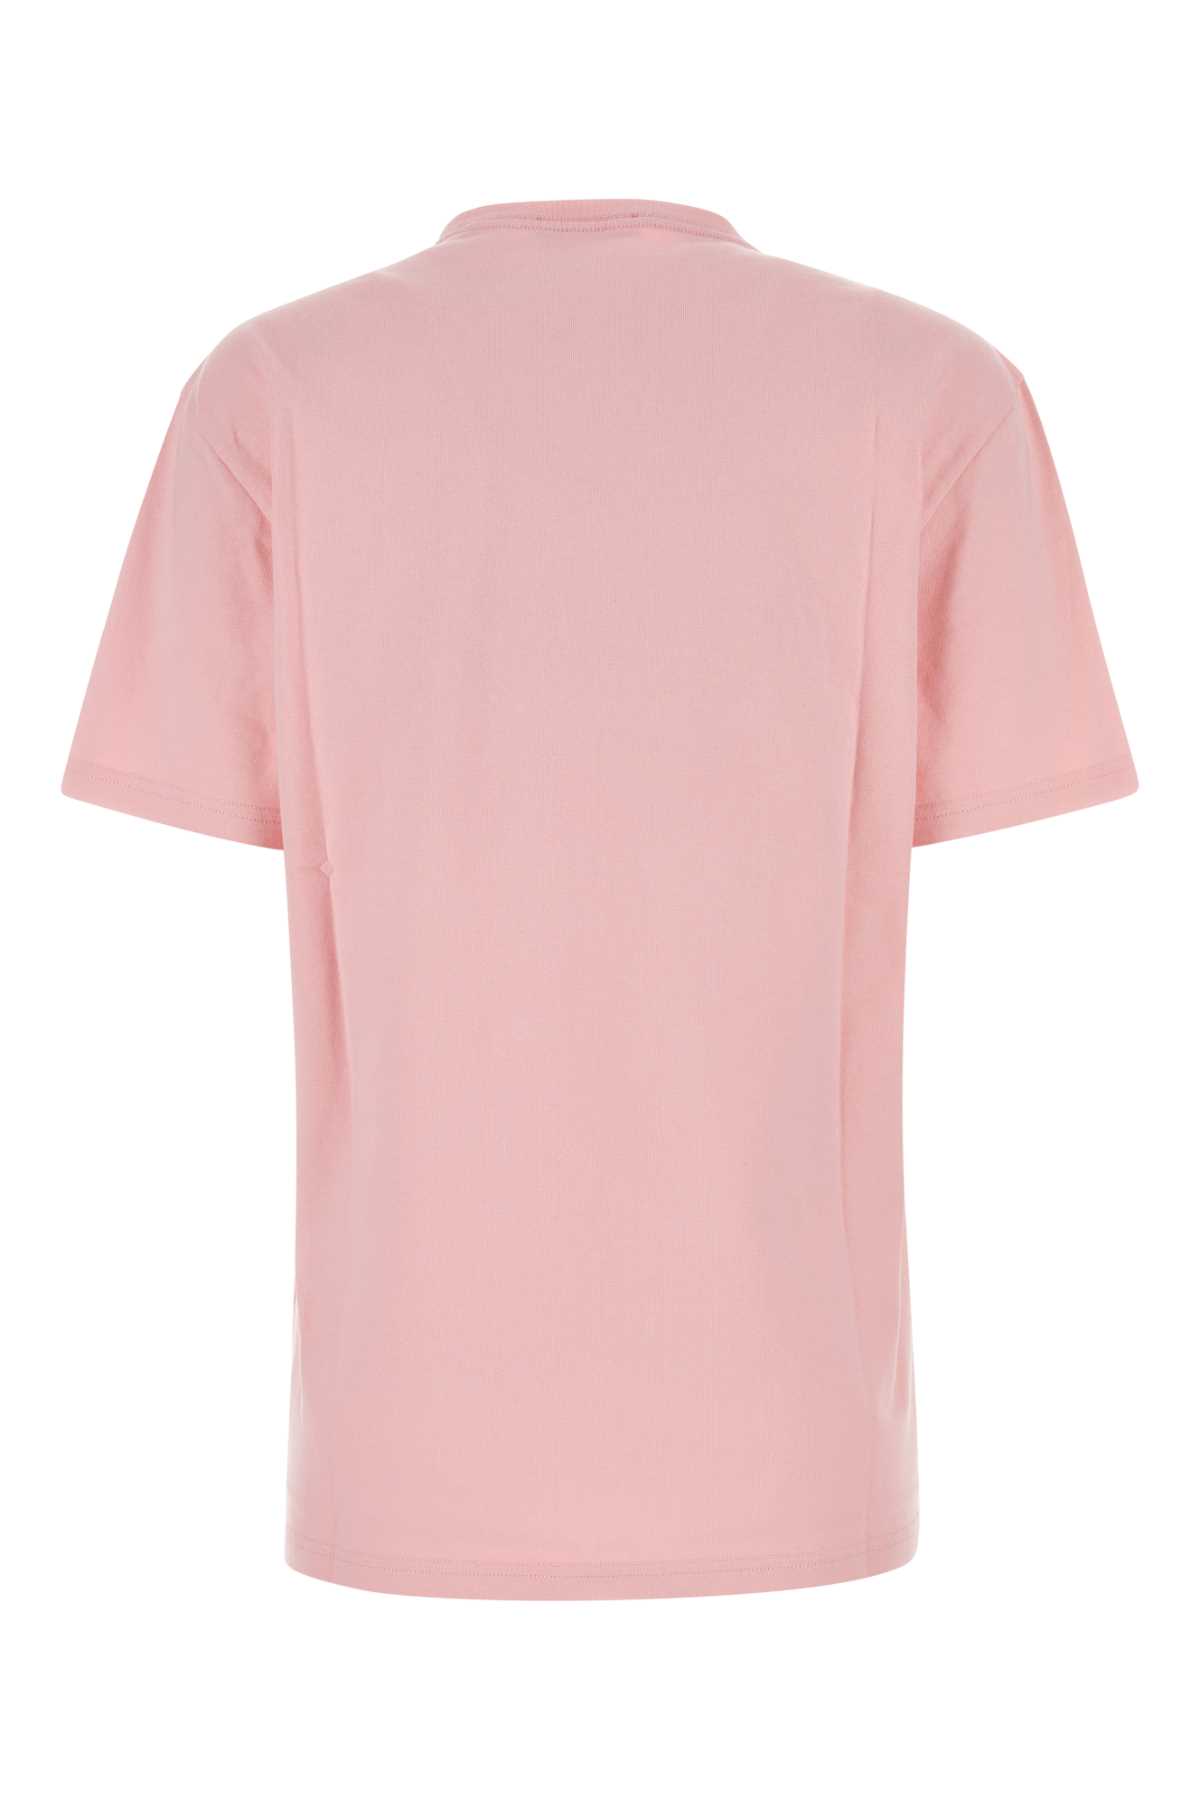 Versace Pink Cotton T-shirt In Palepink